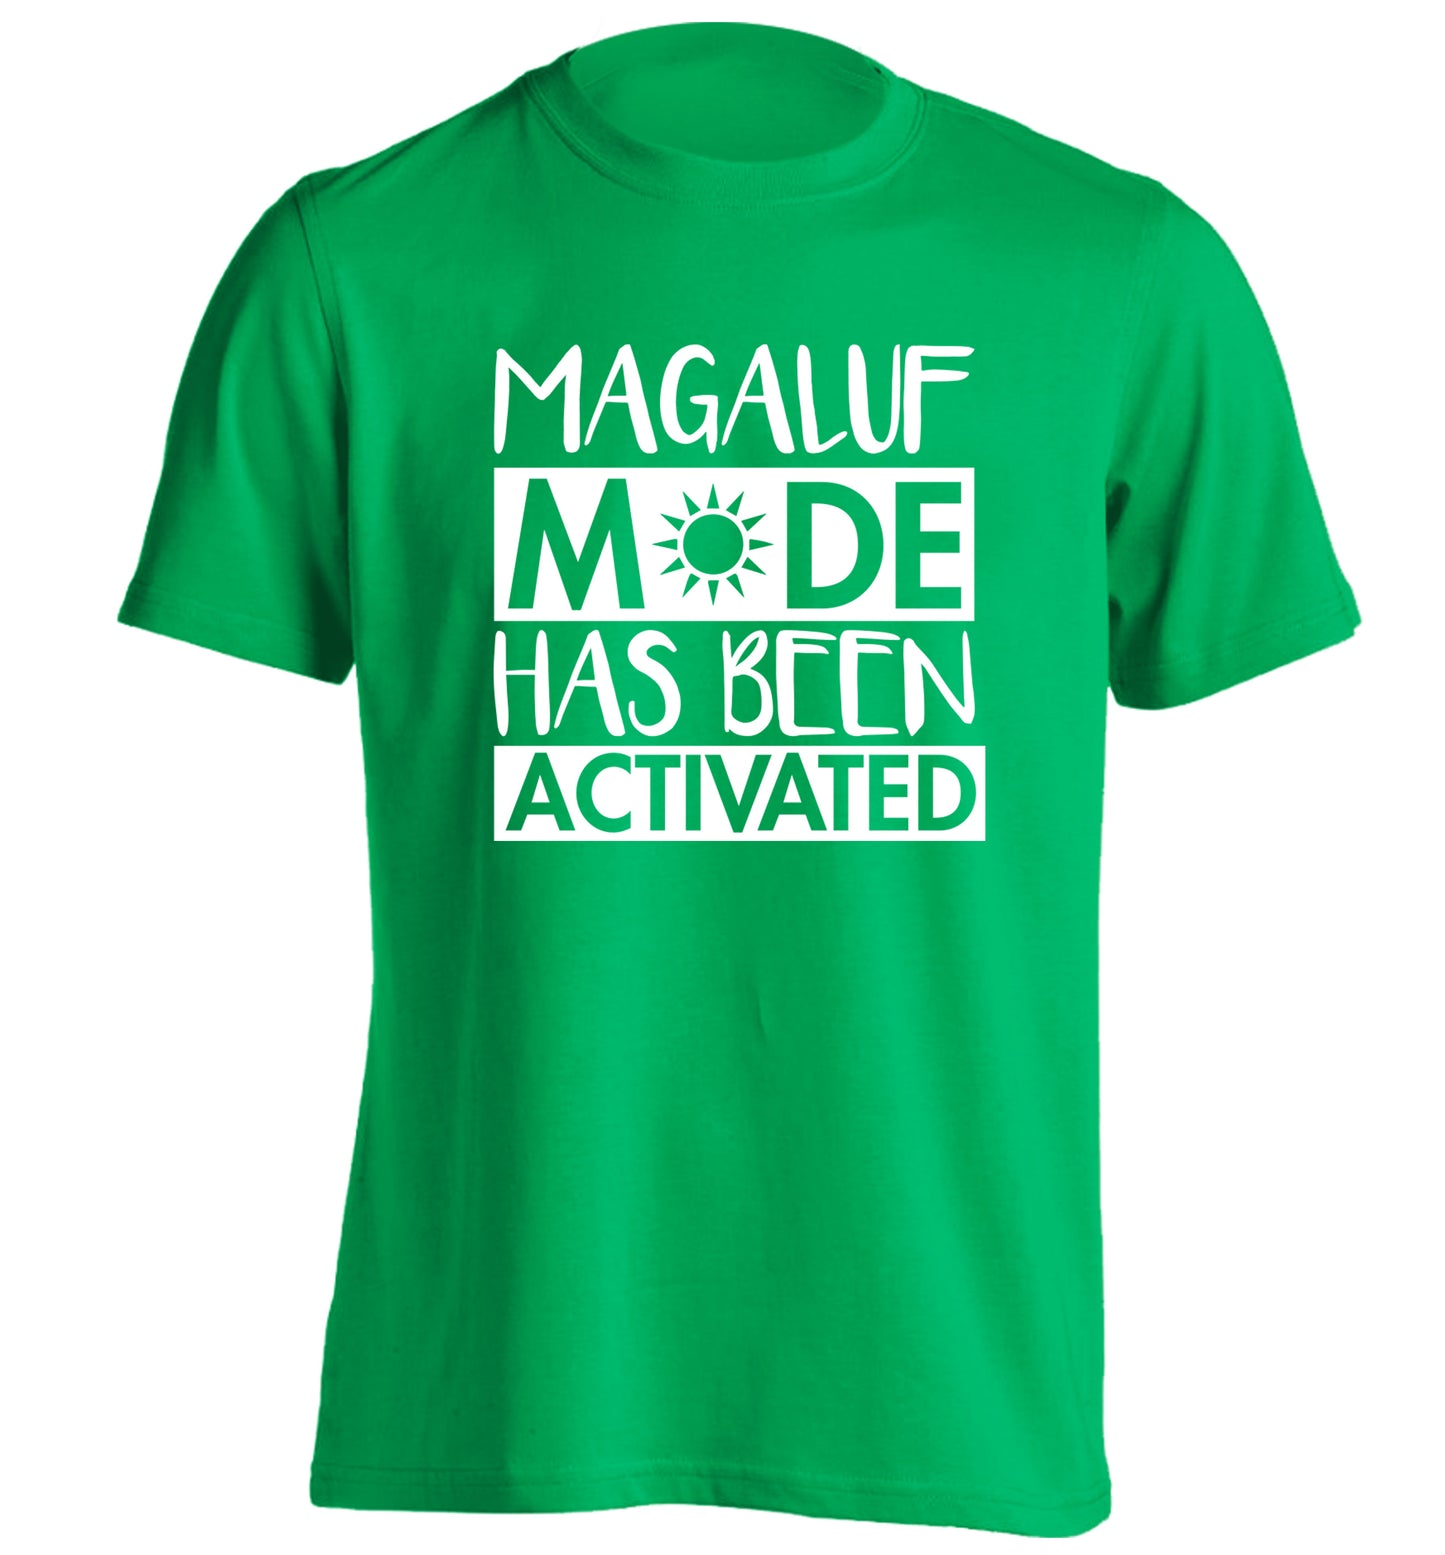 Magaluf mode has been activated adults unisex green Tshirt 2XL